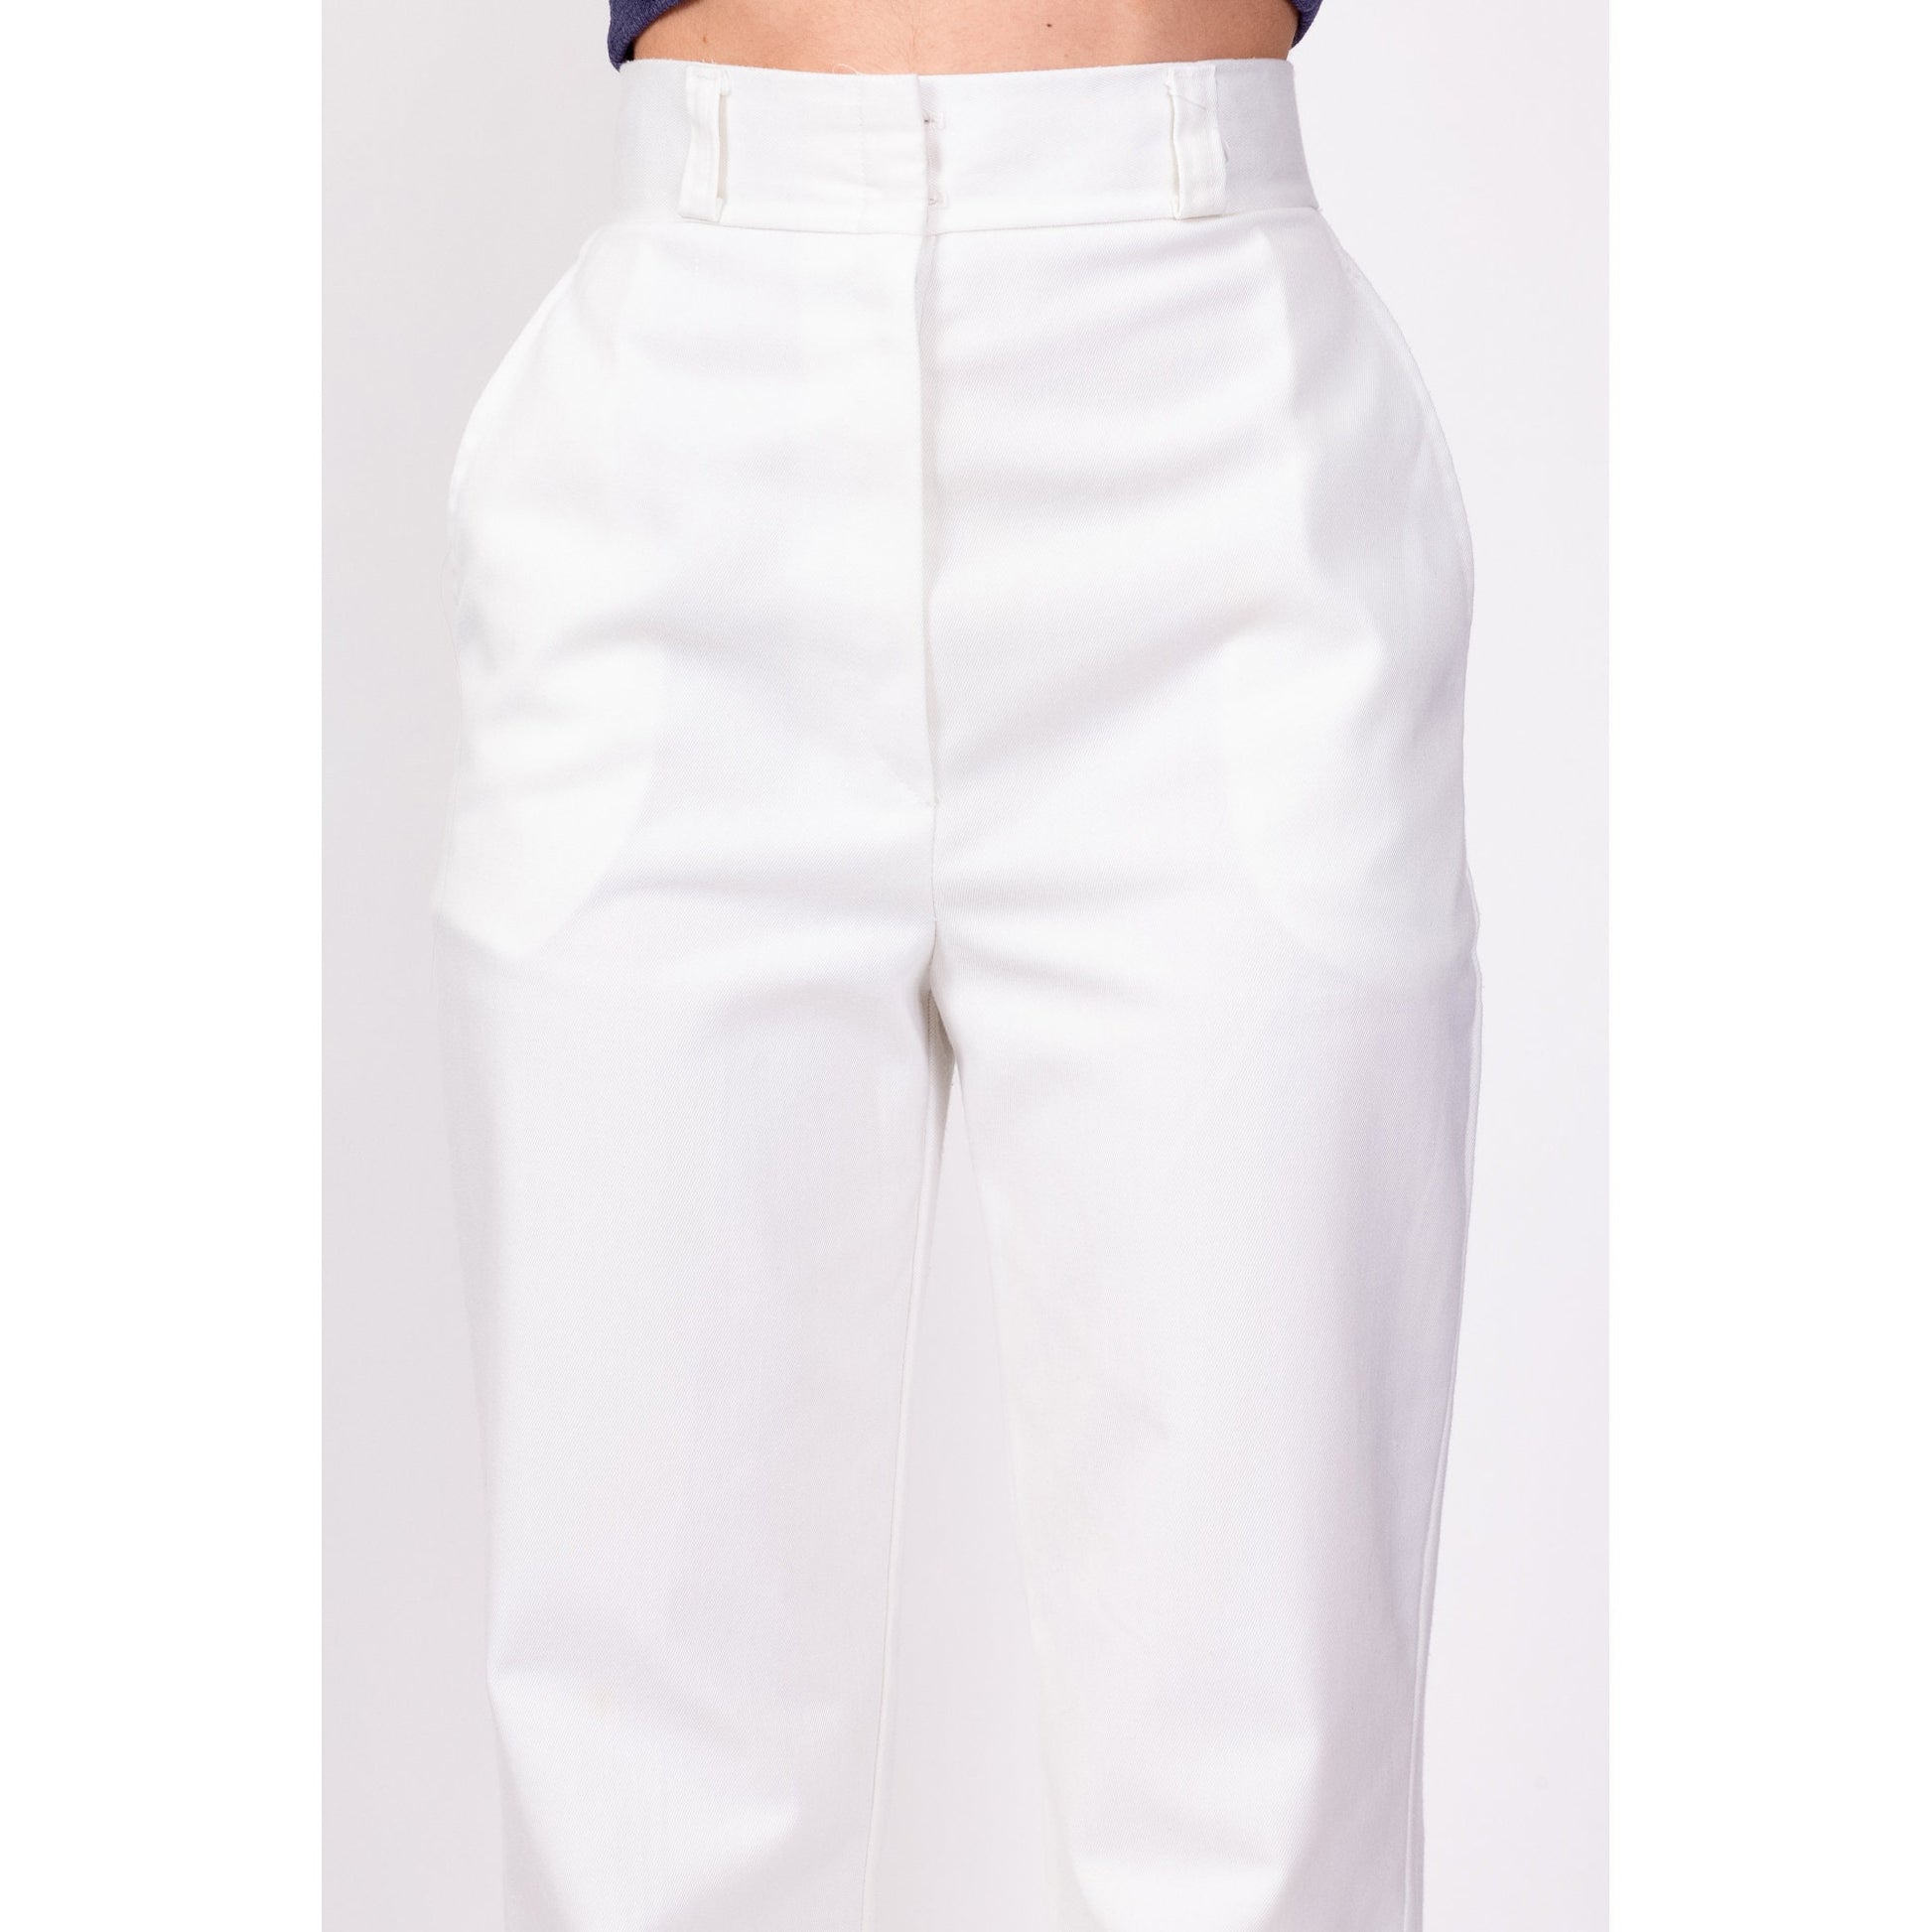 70s White High Waisted Trousers - Extra Small, 23.75" 